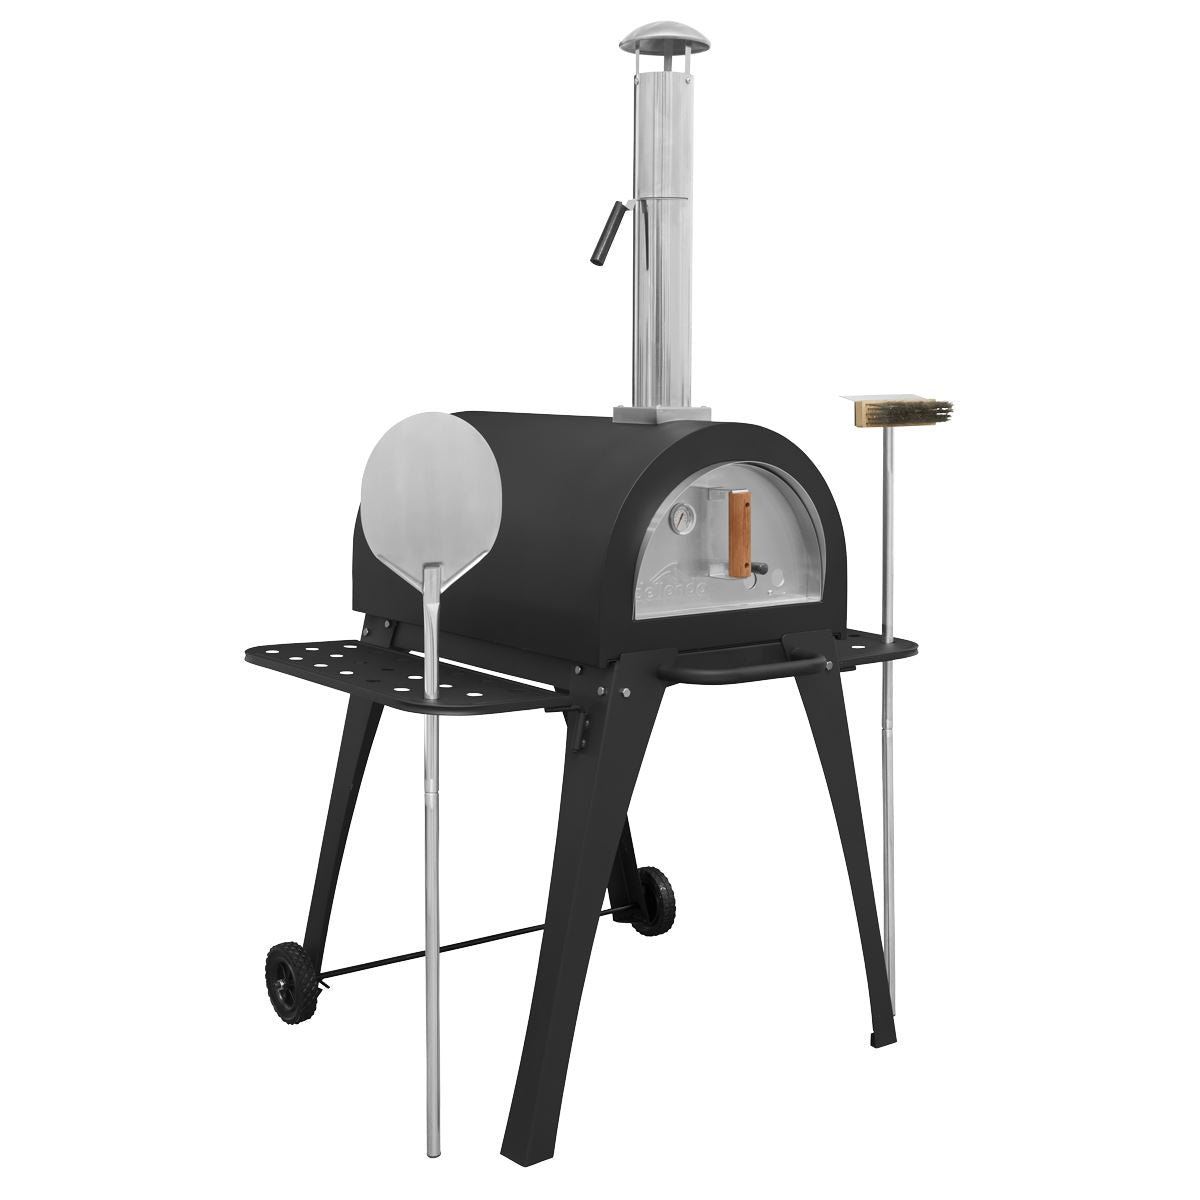 Dellonda Large Outdoor Wood-Fired Pizza Oven & Smoker with Side Shelves & Stand